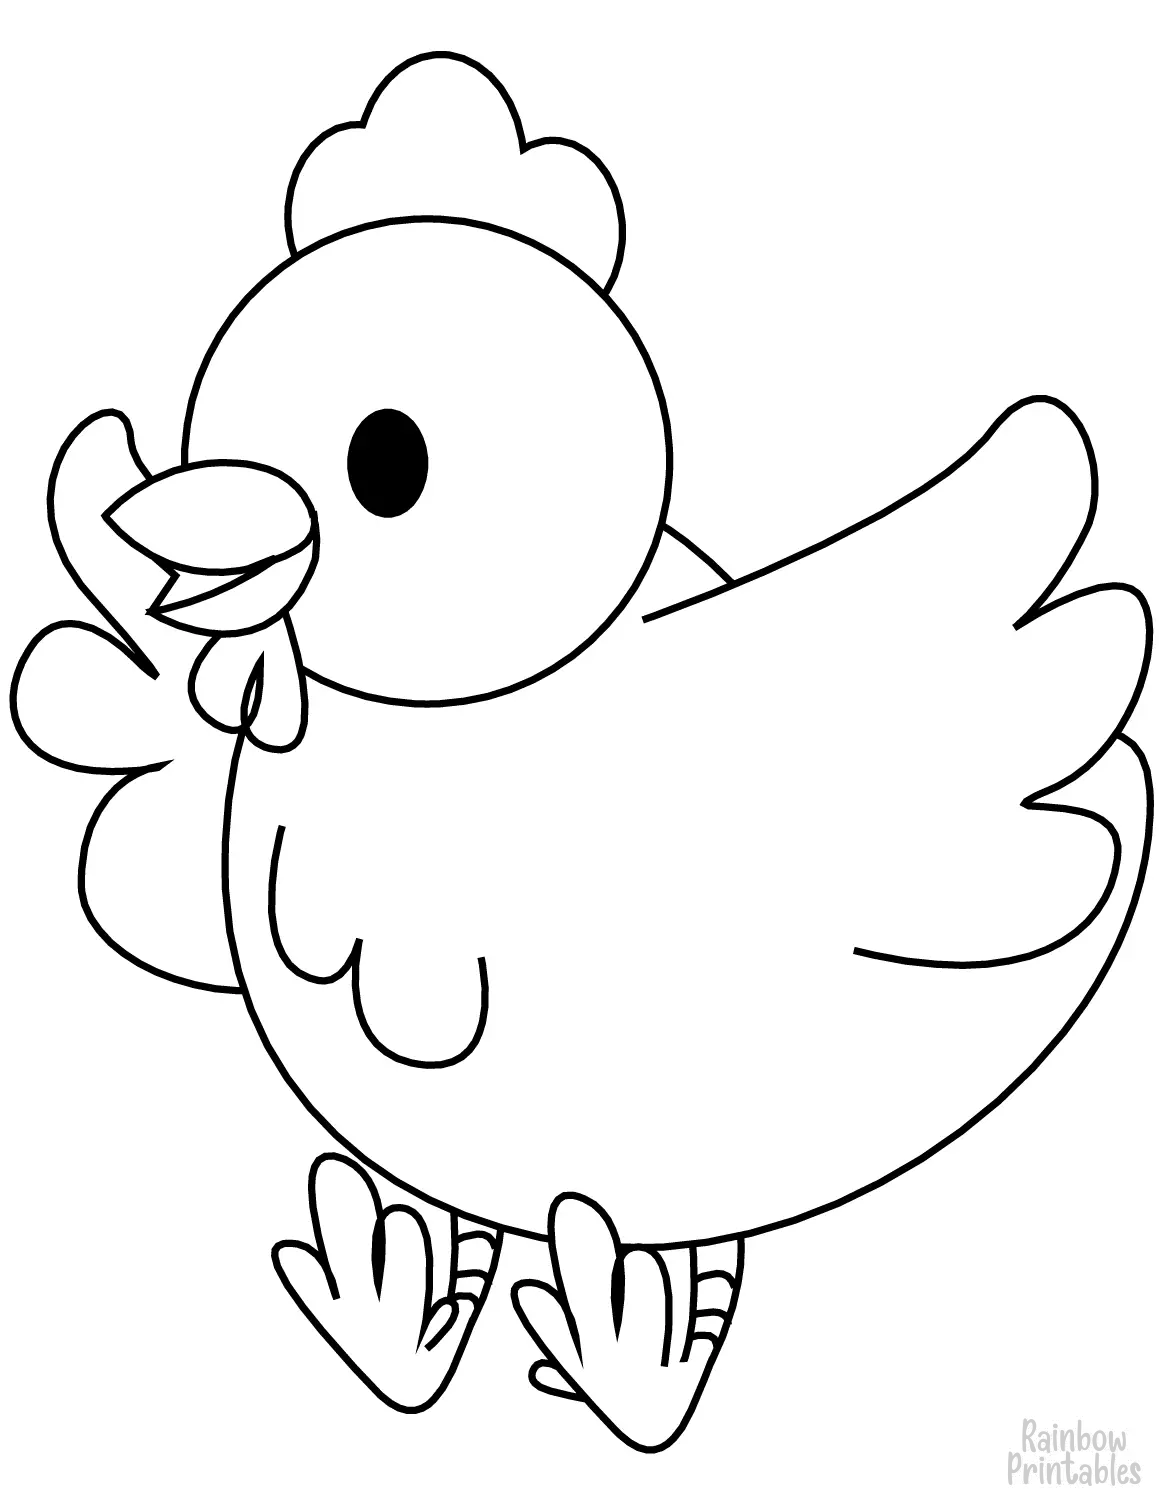 Cartoon-chicken-happy-coloring-page-for-kids-simple-easy